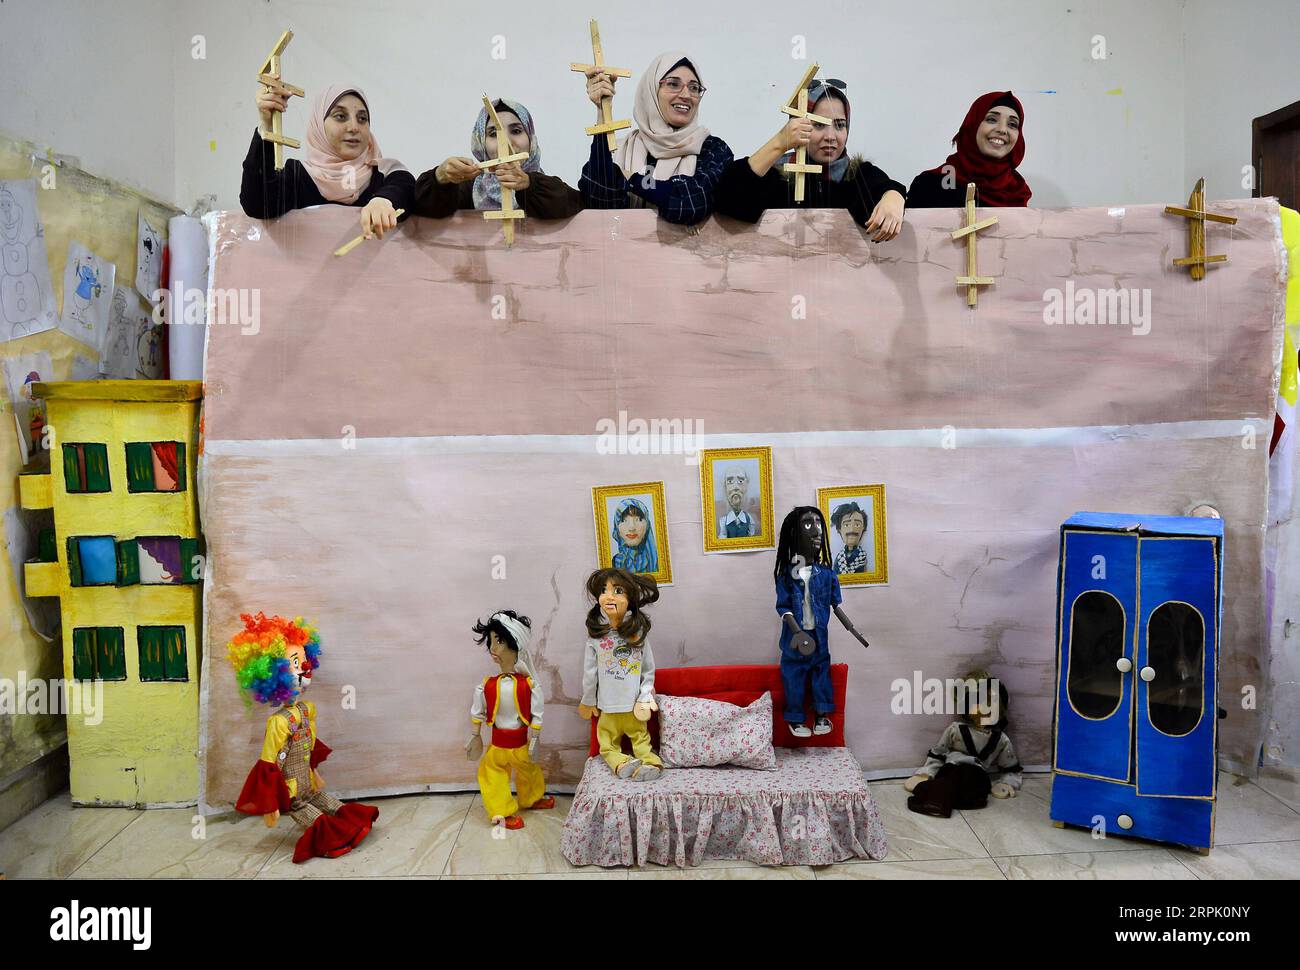 191223 -- GAZA, Dec. 23, 2019 Xinhua -- Palestinian girls show marionettes at Mahdi Karira s office in Gaza City, on Dec. 23, 2019. Mahdi Karira, a 39-year-old master at making the marionette, spent 6 months on training a group of 8 girls and 2 young men to make puppets and perform puppet theater shows for children, in an attempt to promote the art of puppet theater in the Gaza Strip. Photo by Rizek Abdeljawad/Xinhua MIDEAST-GAZA-ARTIST-PUPPET THEATER PUBLICATIONxNOTxINxCHN Stock Photo